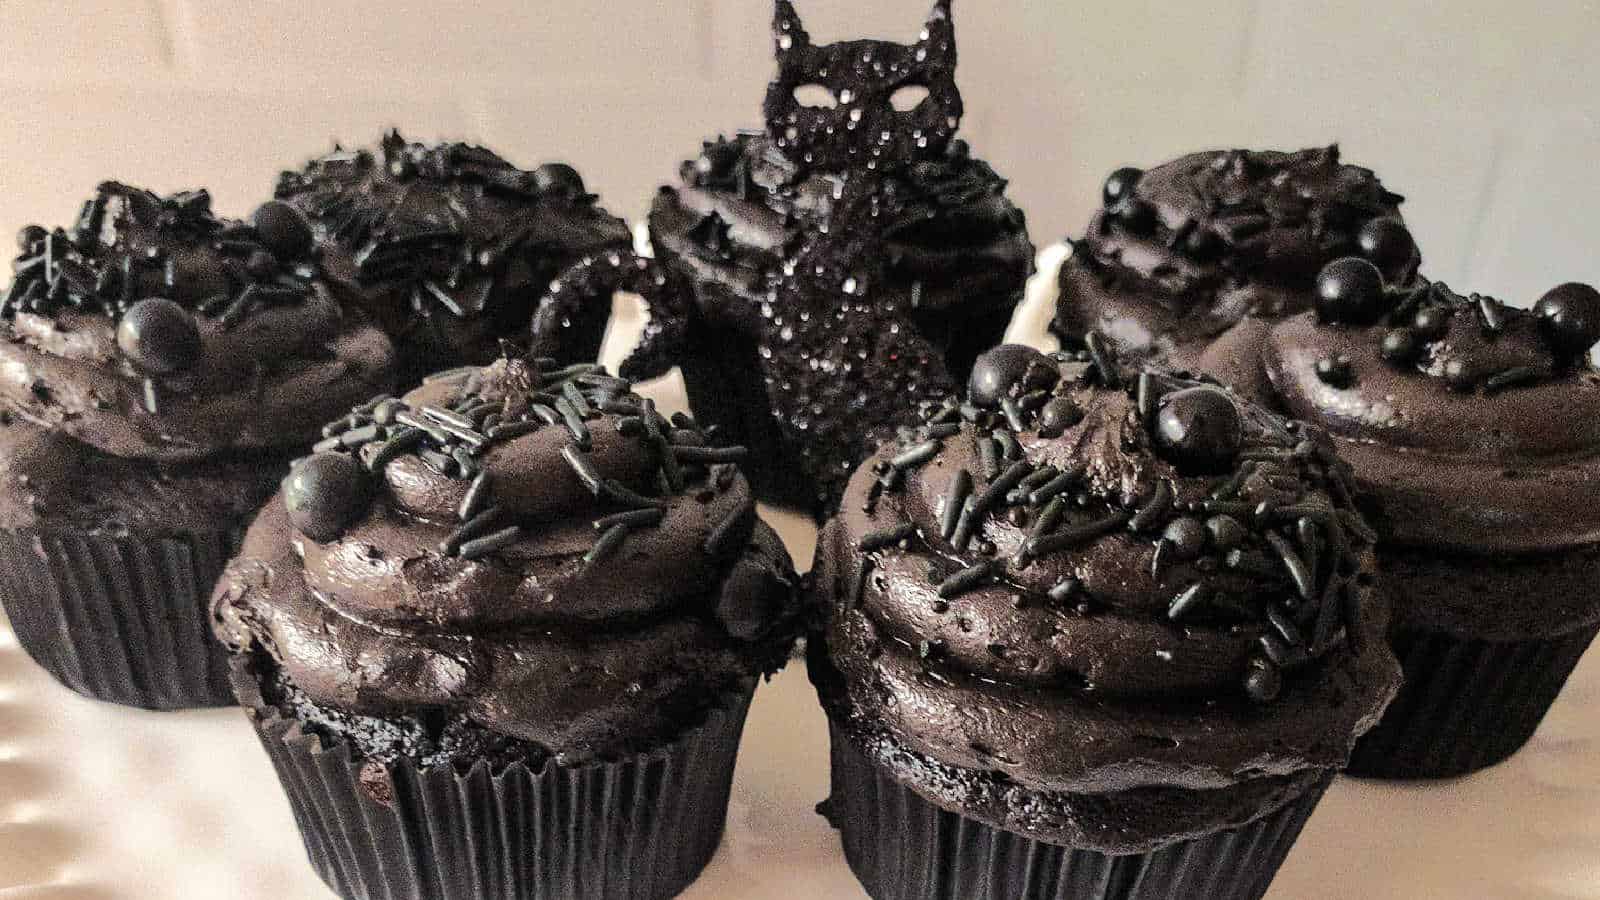 A group of black cupcakes decorated with black frosting.